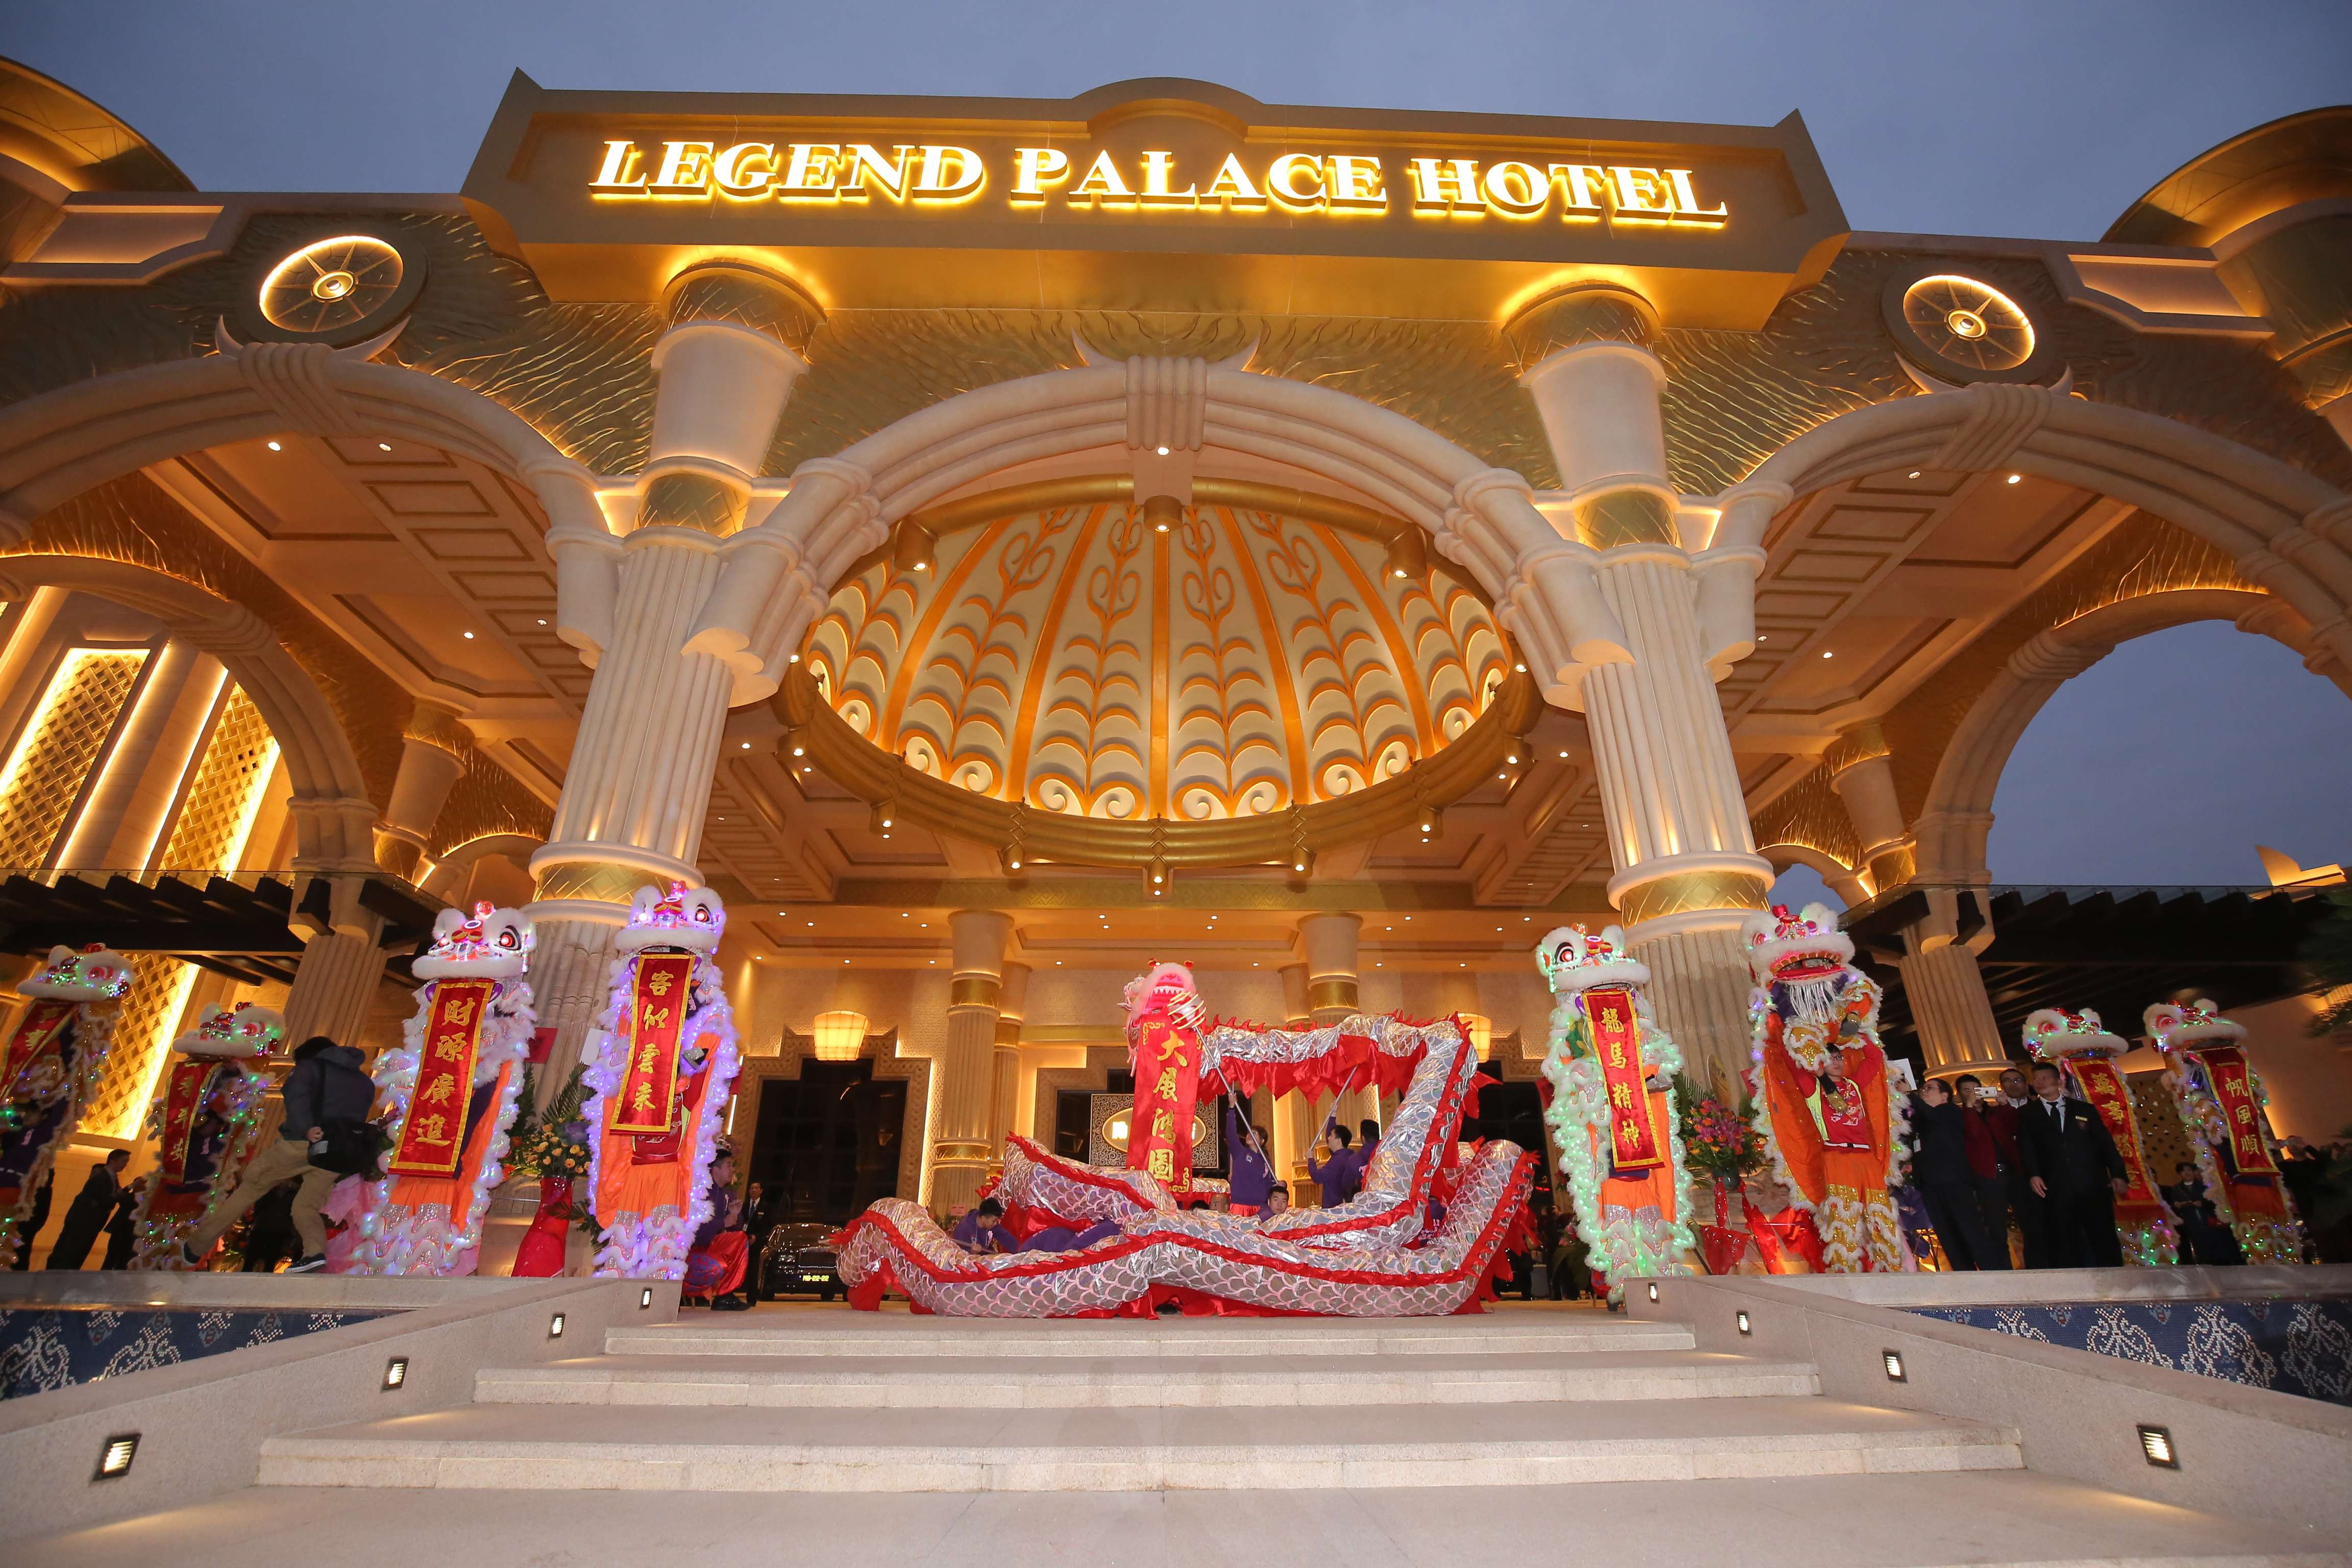 The 223-room Legend Palace Hotel opened in Fisherman’s Wharf, last month, and is the first of ‘The Super Six’ luxury hotels that are expected to open in Macau in the coming year.